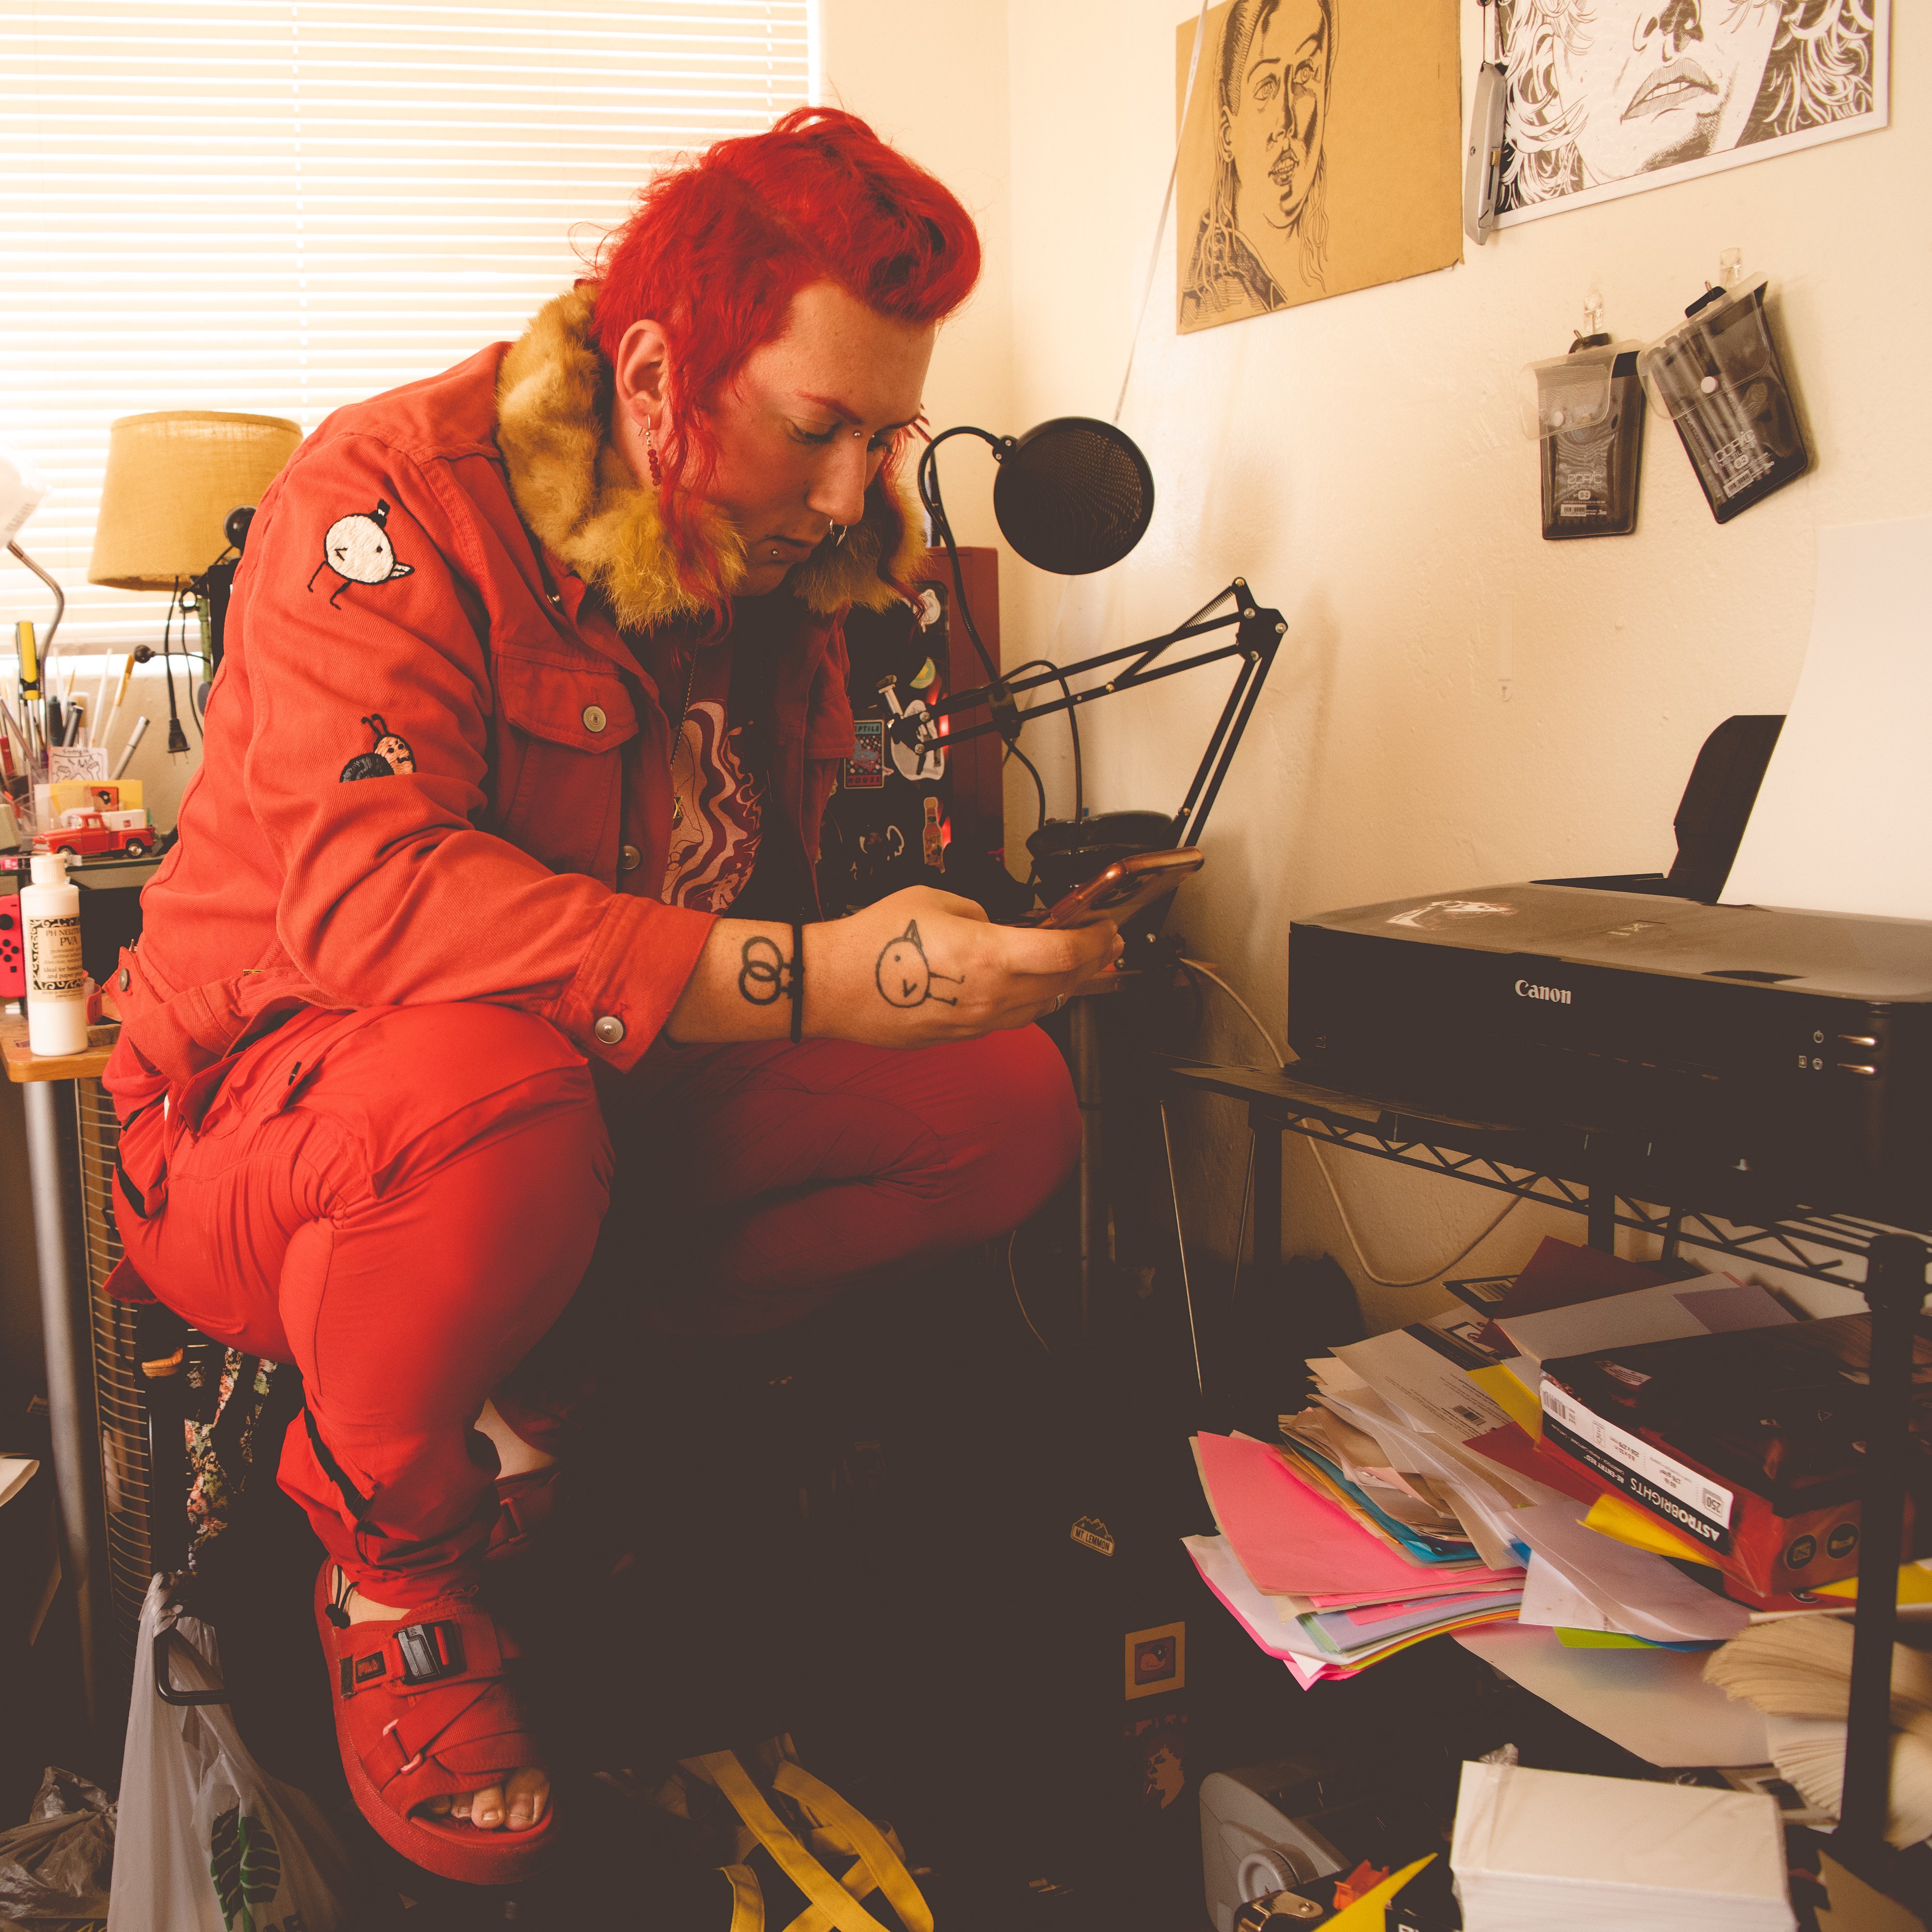 a picture of ruby may valentine, she is wearing entirely red clothes that look very cool, her hair is also entirely red, shes crouched on a chair looking at her phone in a cluttered room